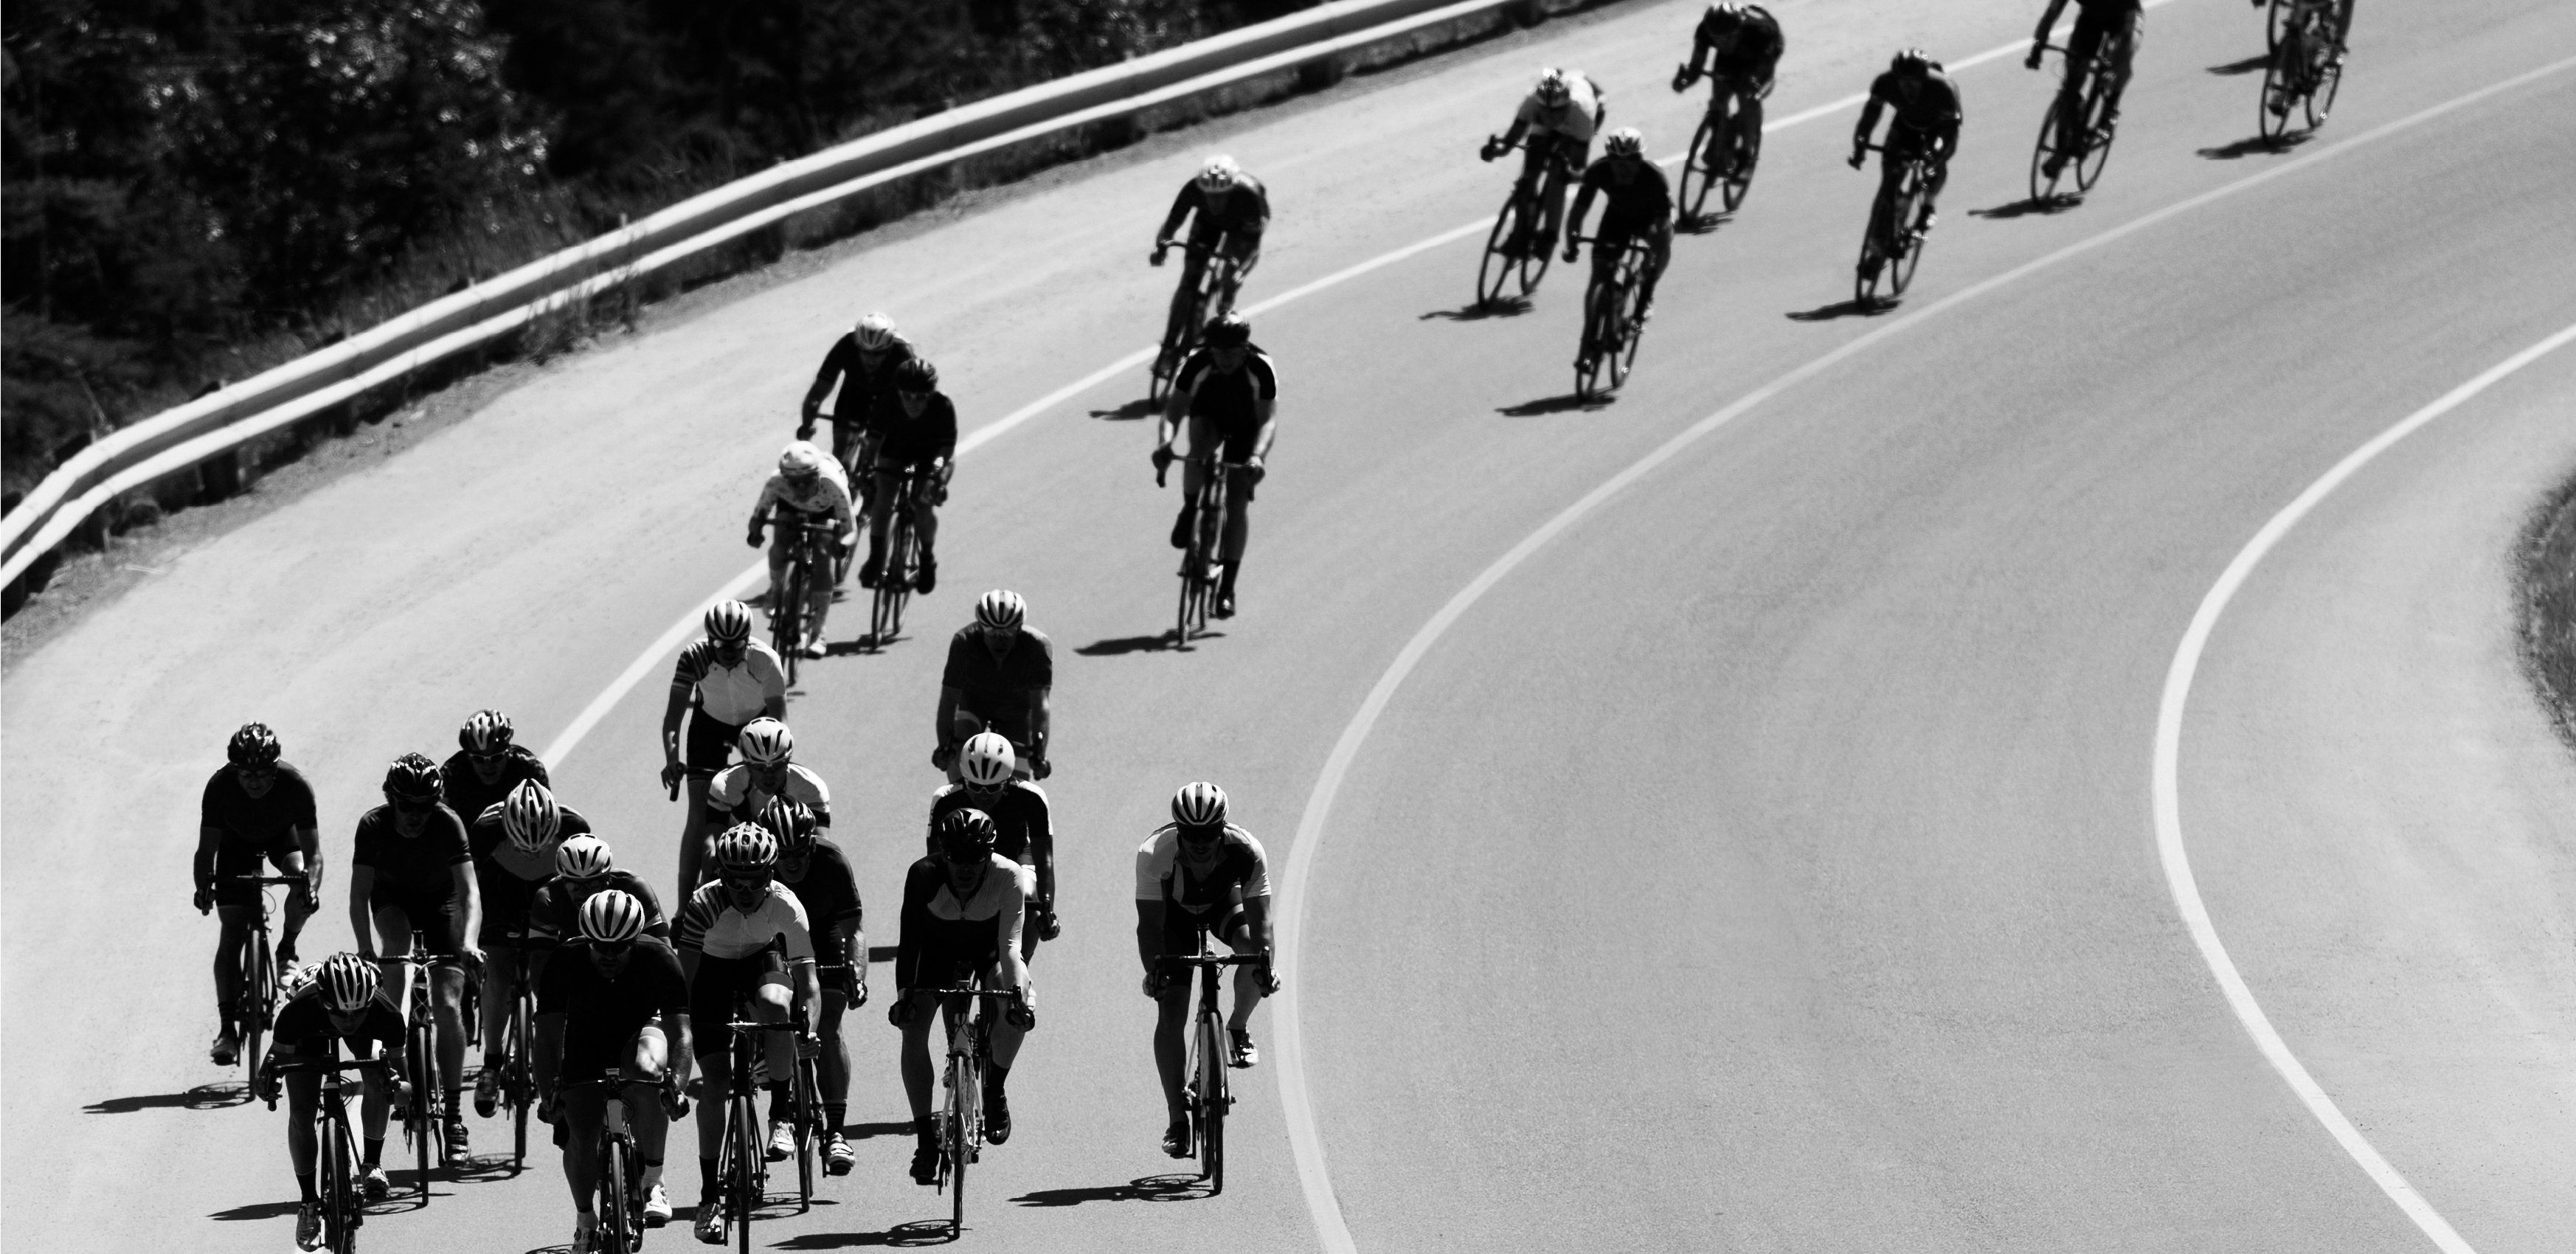 A group of men ride together during a road bicycle race on a sunny day.